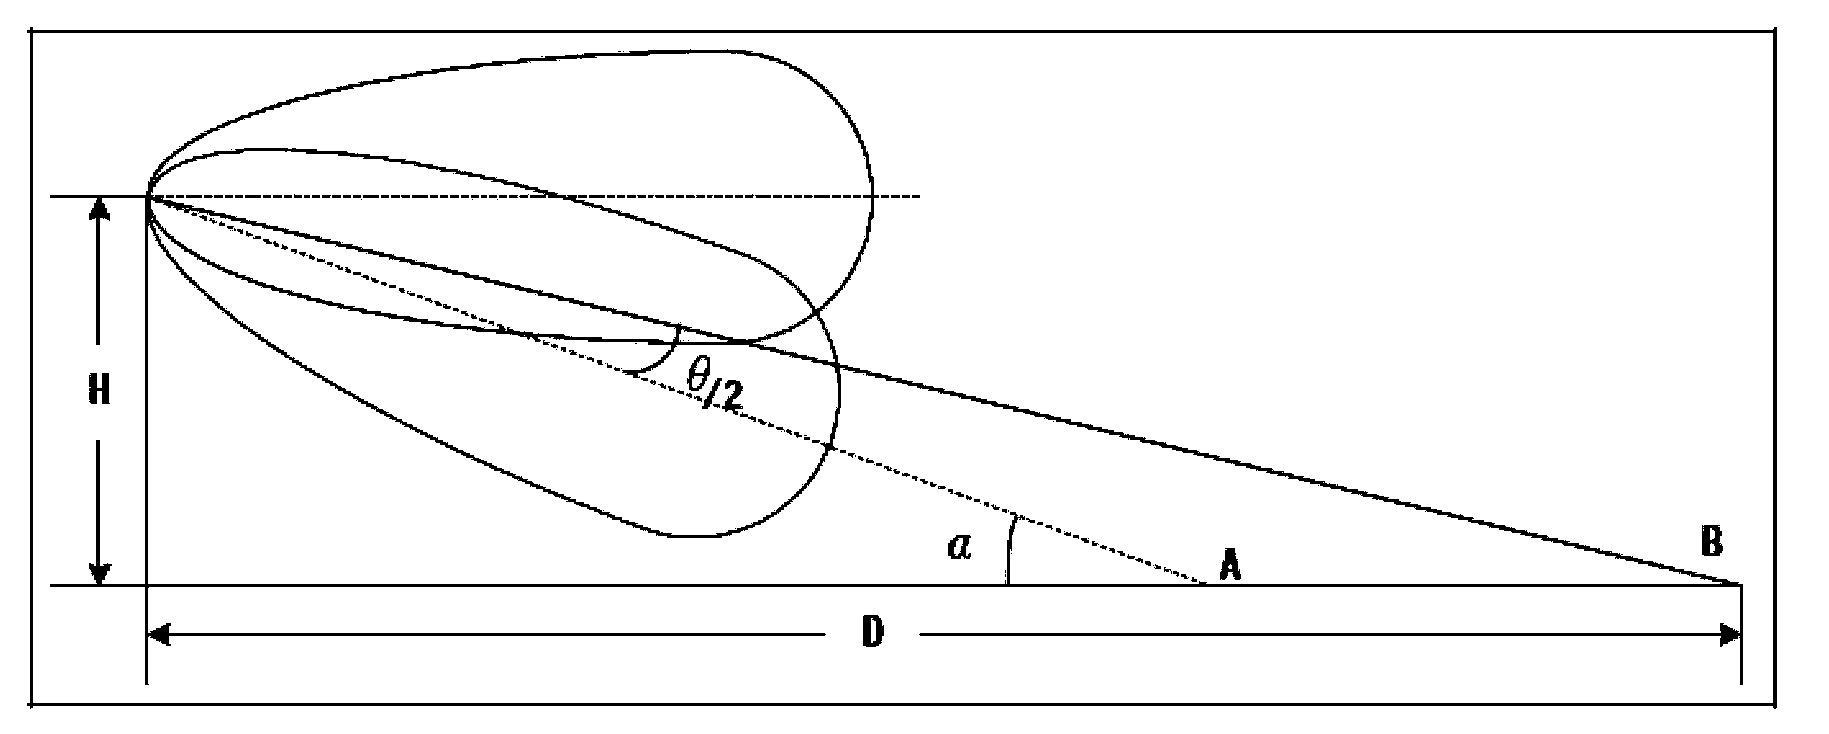 A method and a system for determining the downward inclination angles of antennas